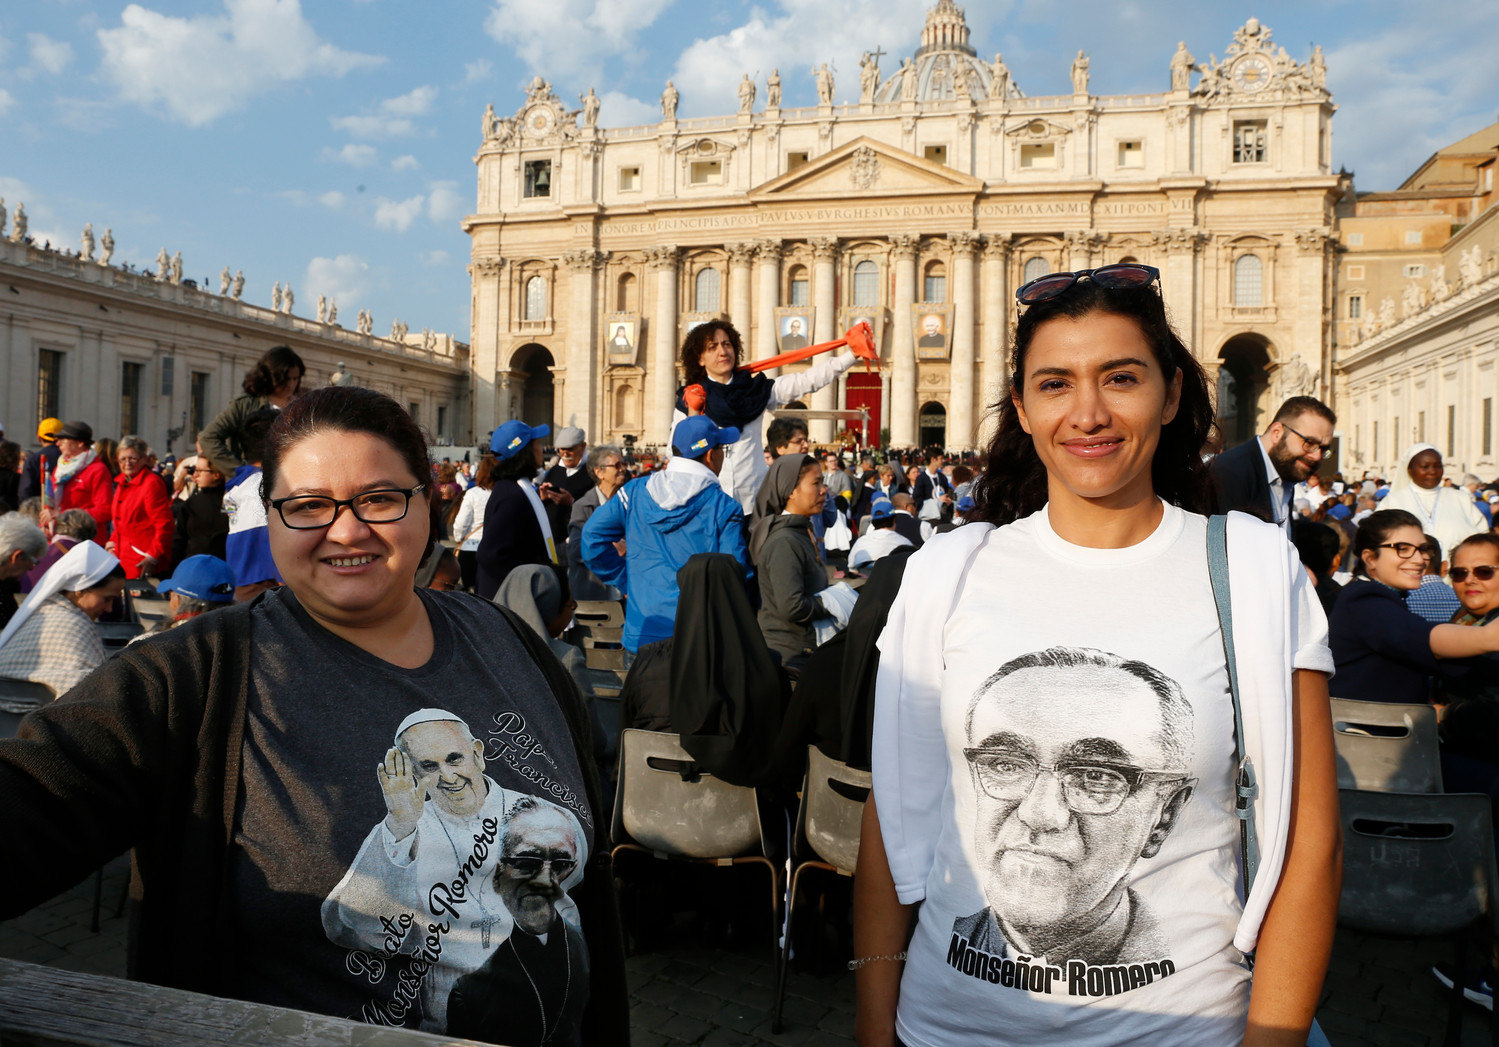 Women wait for the start of the canonization Mass for seven new saints celebrated by Pope Francis in St. Peter’s Square at the Vatican Oct. 14. Among those canonized were St. Paul VI and St. Oscar Romero.